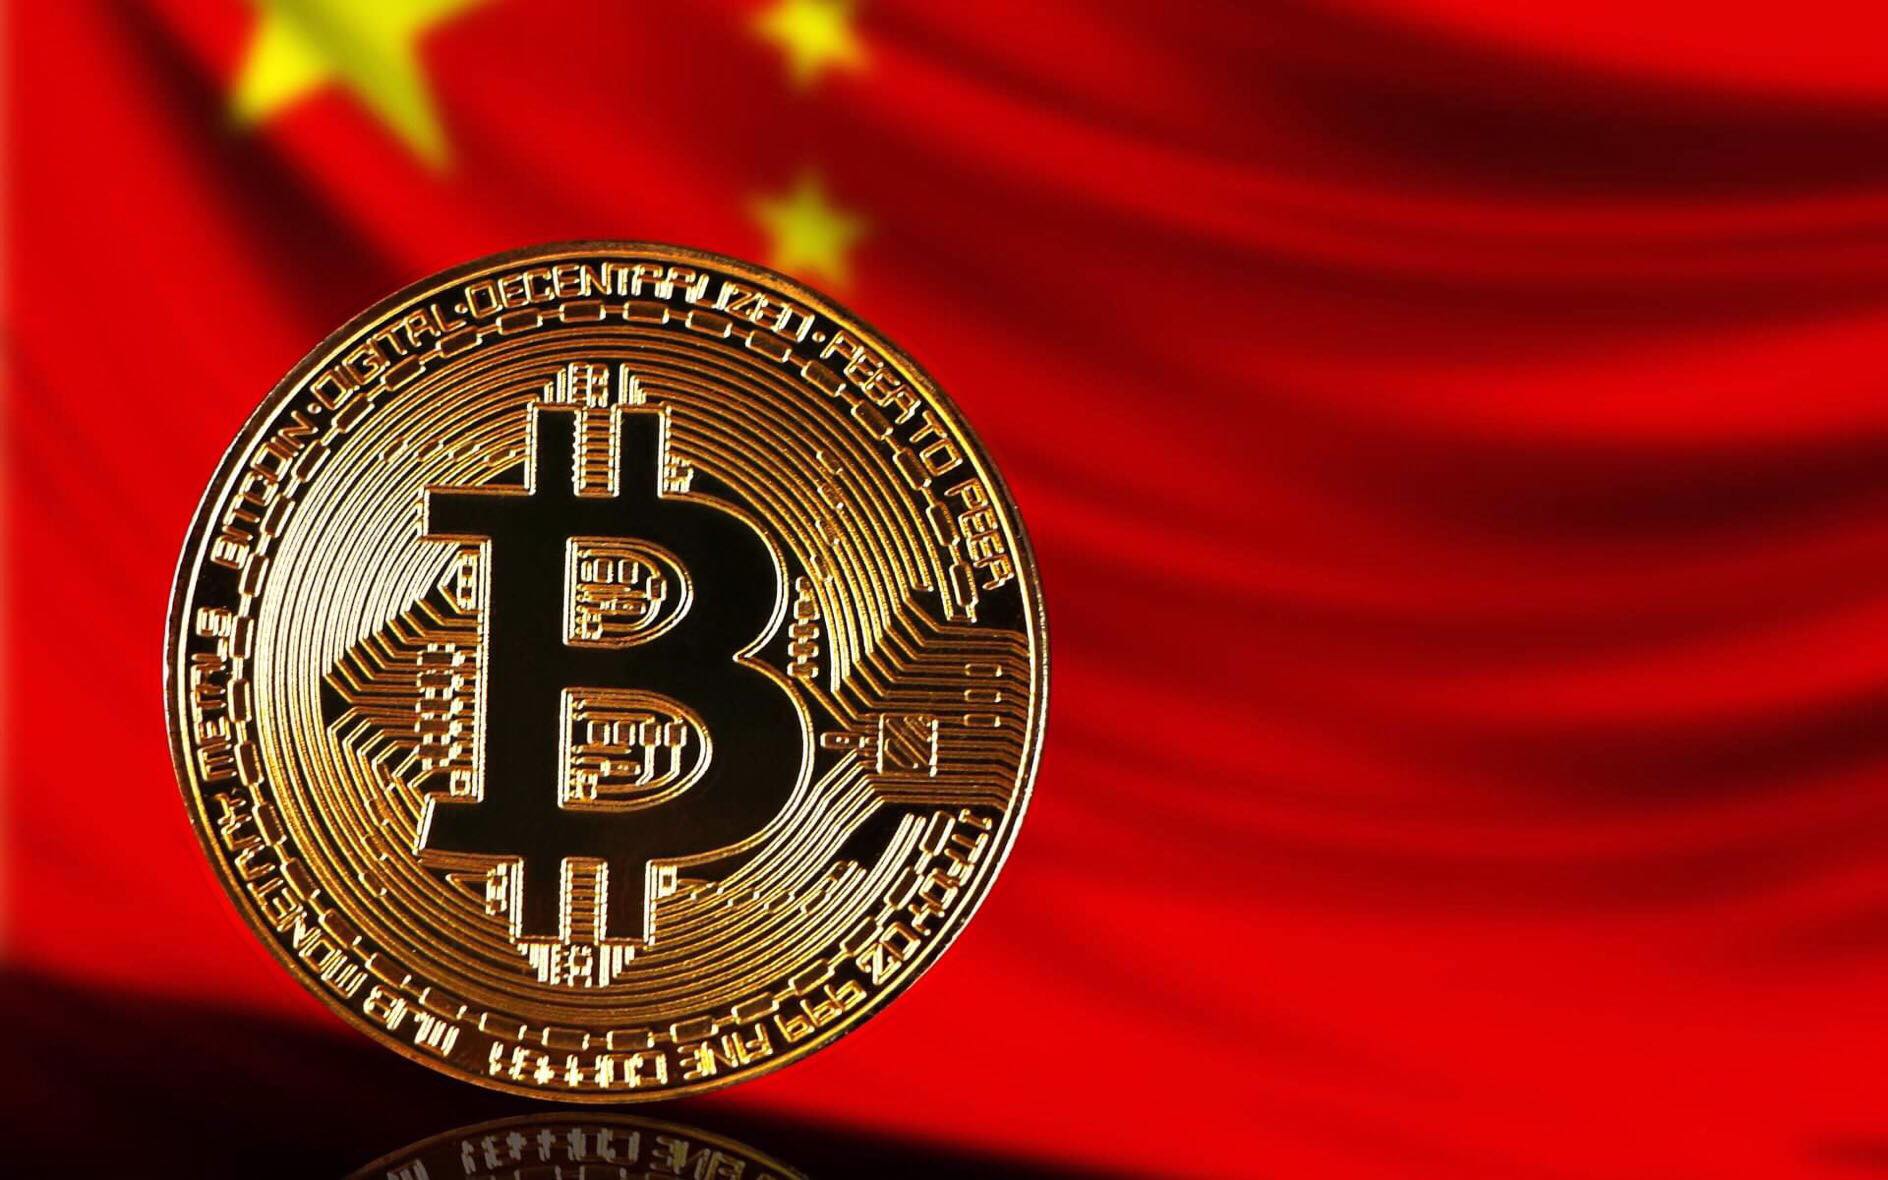 China Clarifies its Stance on Bitcoin: Legal if the Crypto Does Not Act as Alternative to Fiat